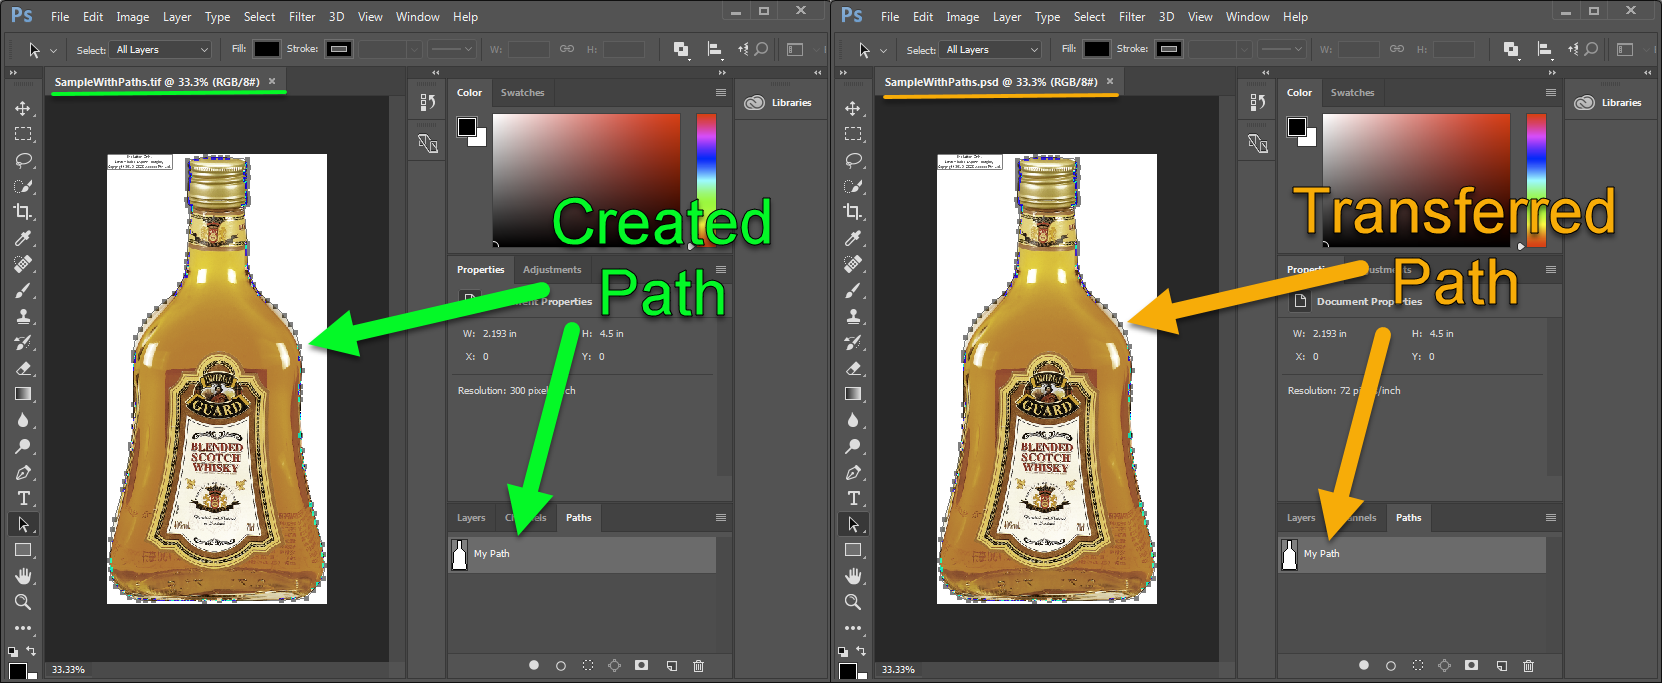 Clipping Path transferred to Psd image is identical to Tiff Path